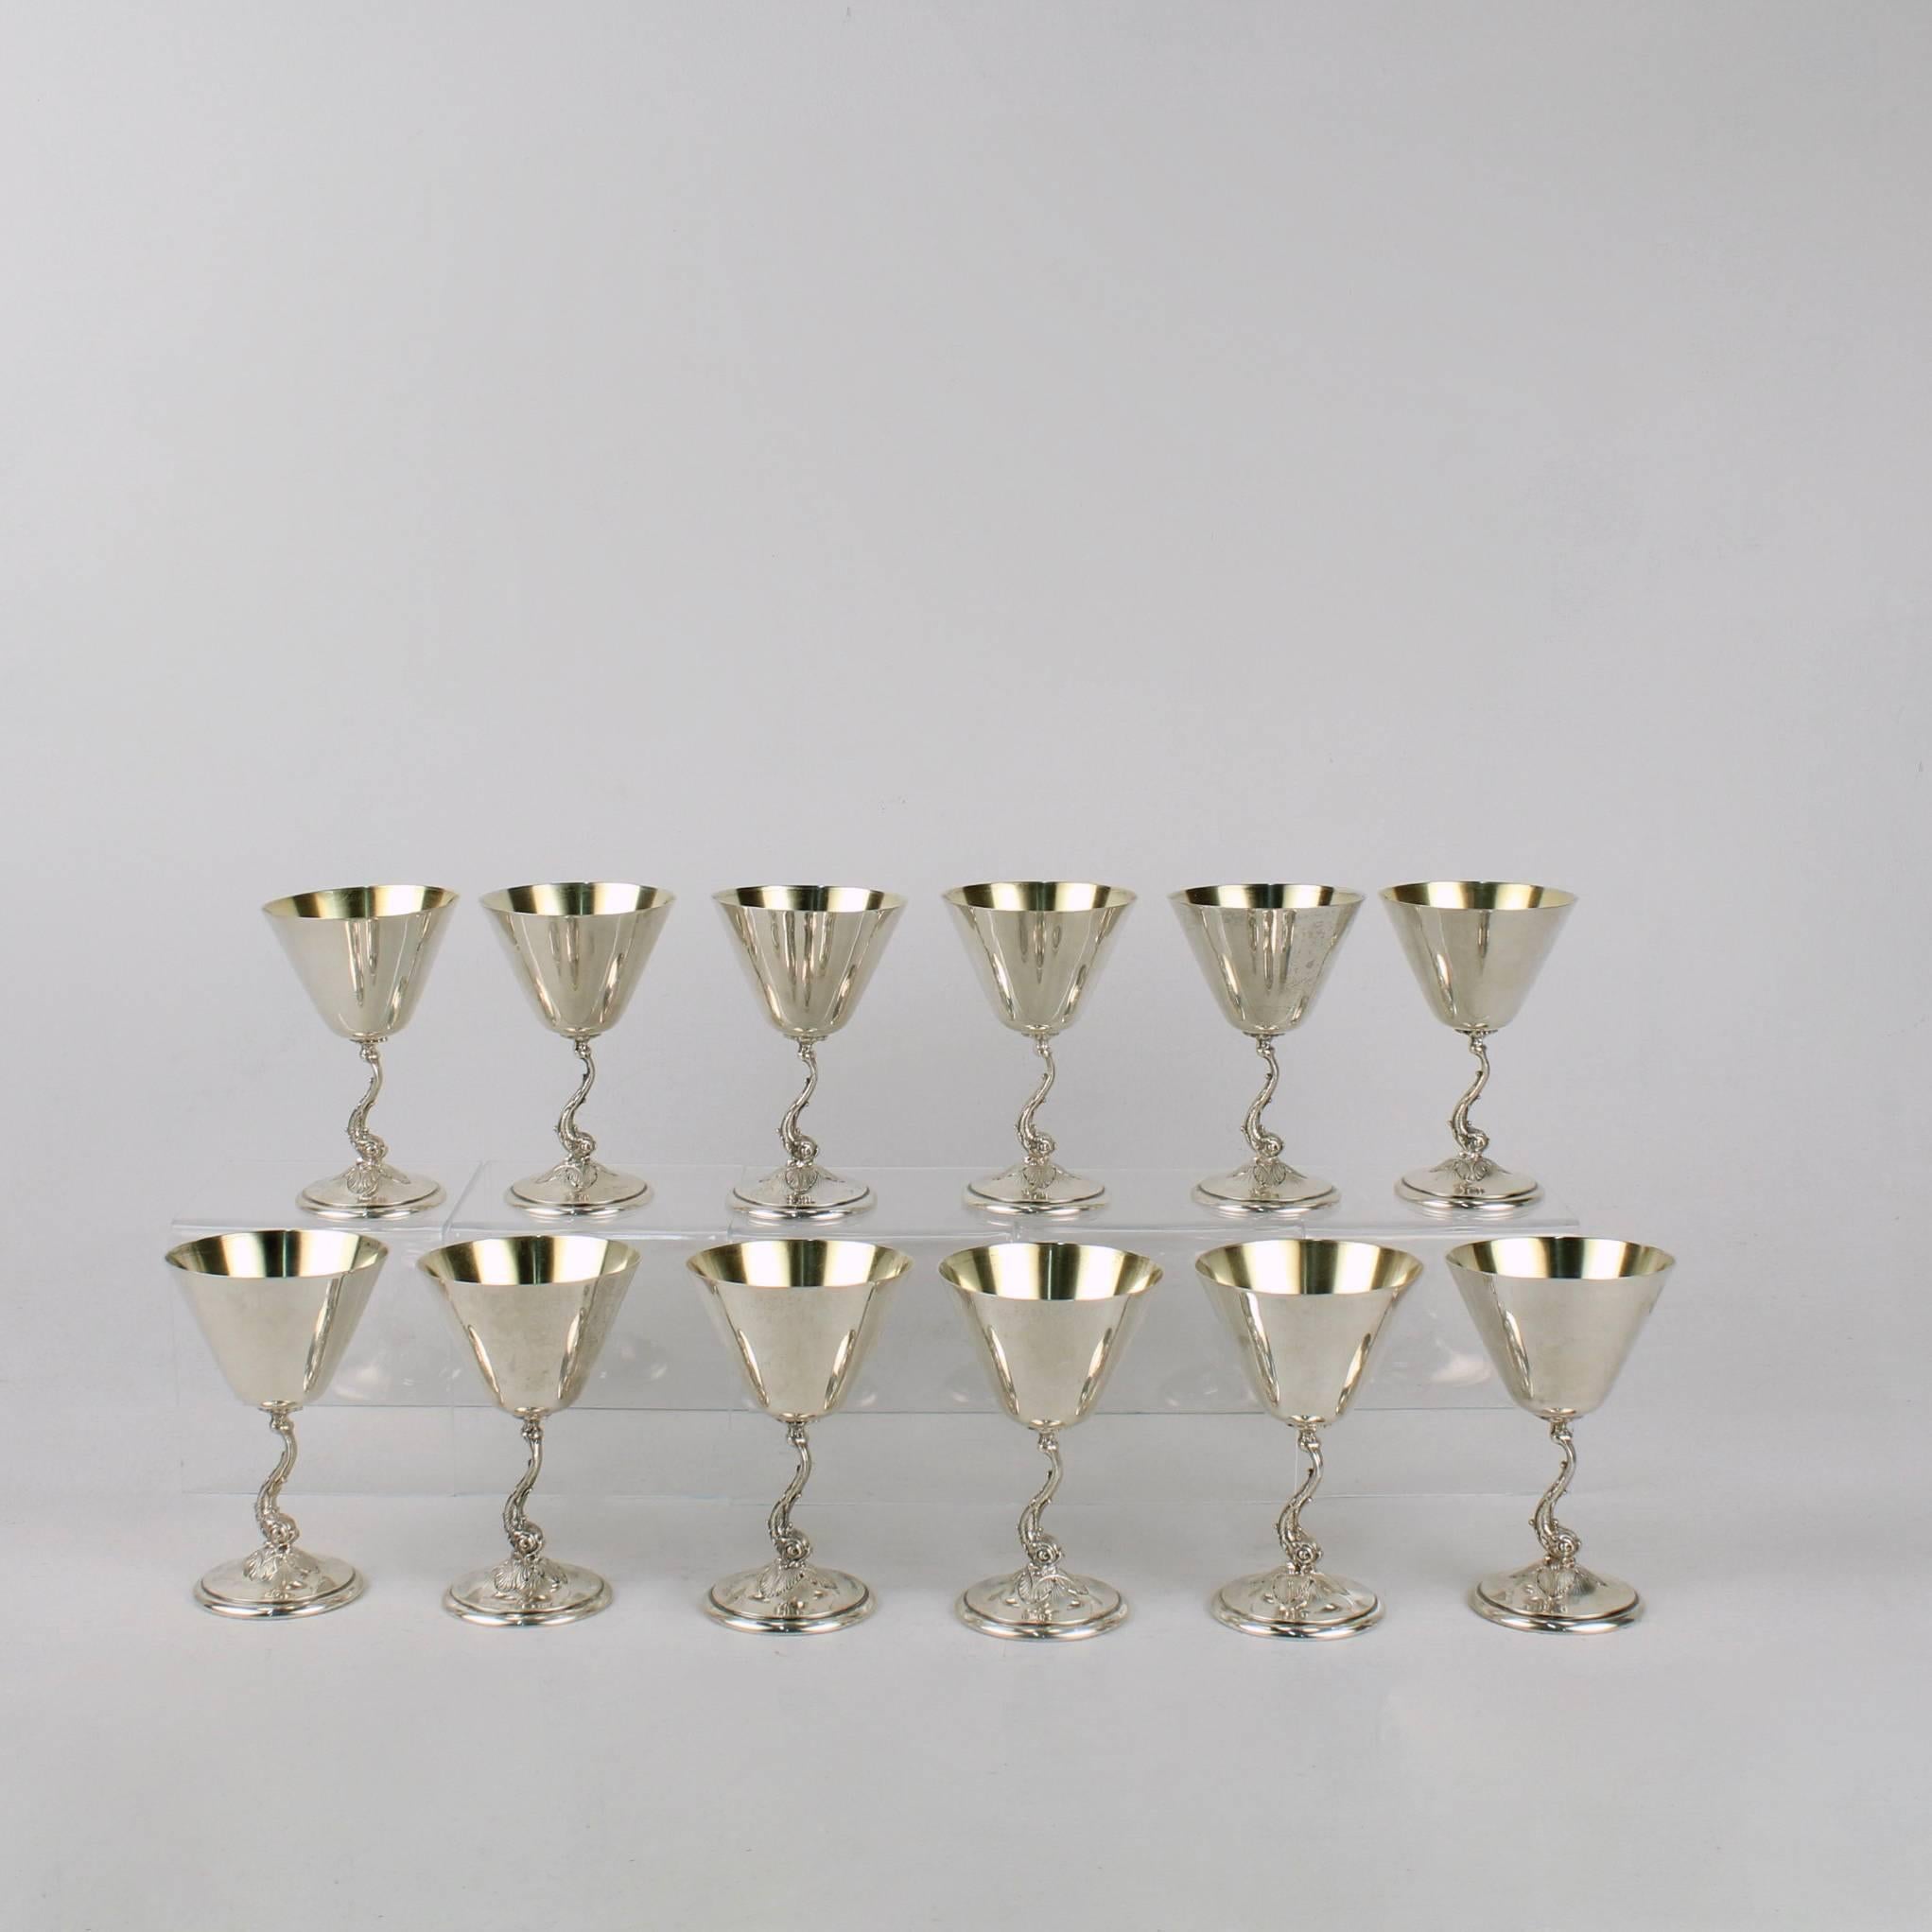 A complete set of 12 Art Deco sterling silver martini or cocktail goblets.

Manufactured by Redlich & Co of New York, New York and retailed by Gorham Inc.

Each cup is supported by a cast figural dolphin-form stem that rests on an engraved round